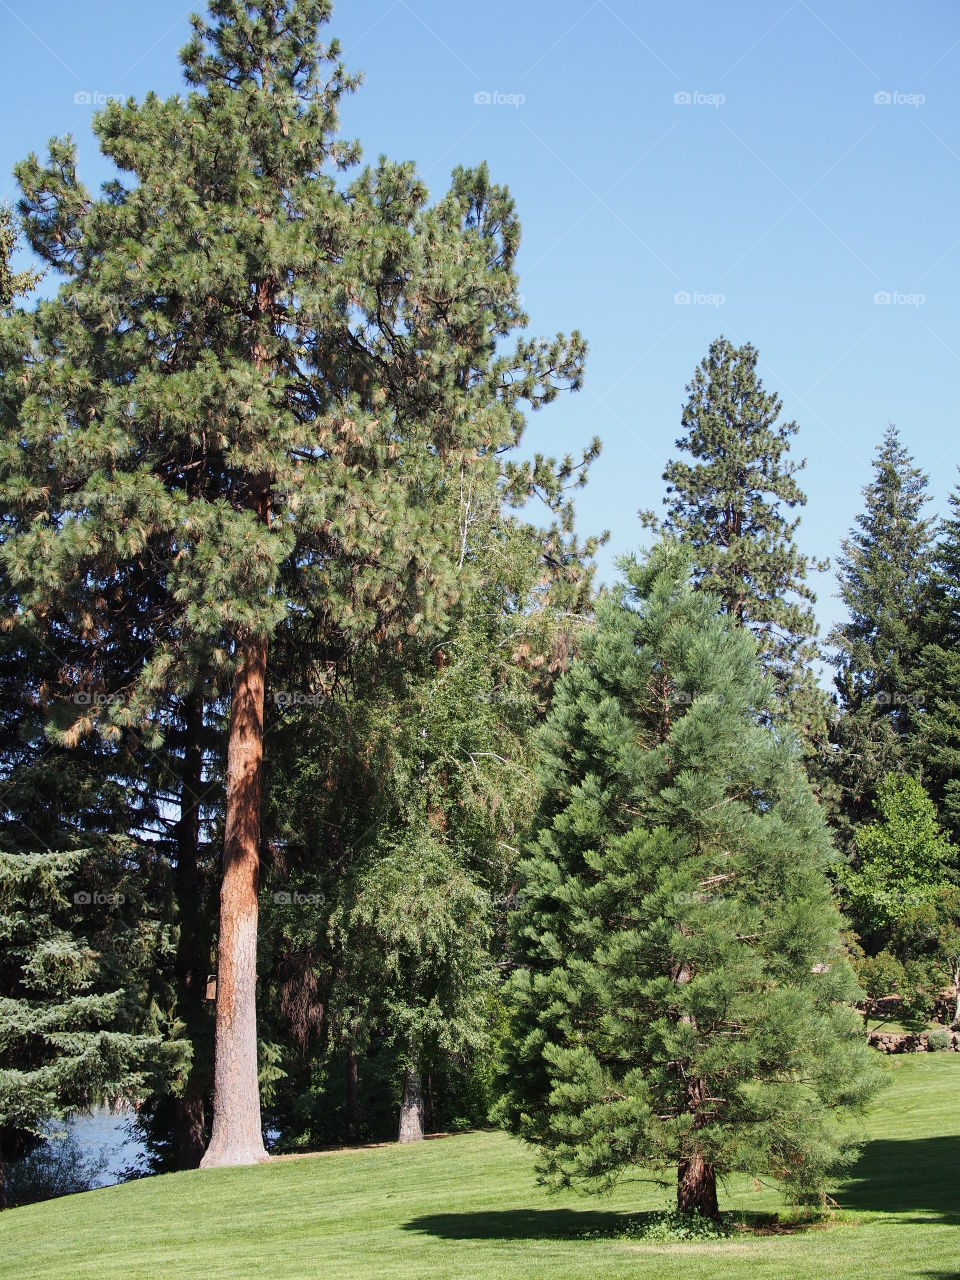 Ponderosa pine trees with beautiful green deciduous trees in the lush grassy landscaping of Pioneer Park in Bend in Central Oregon on a sunny summer day. 